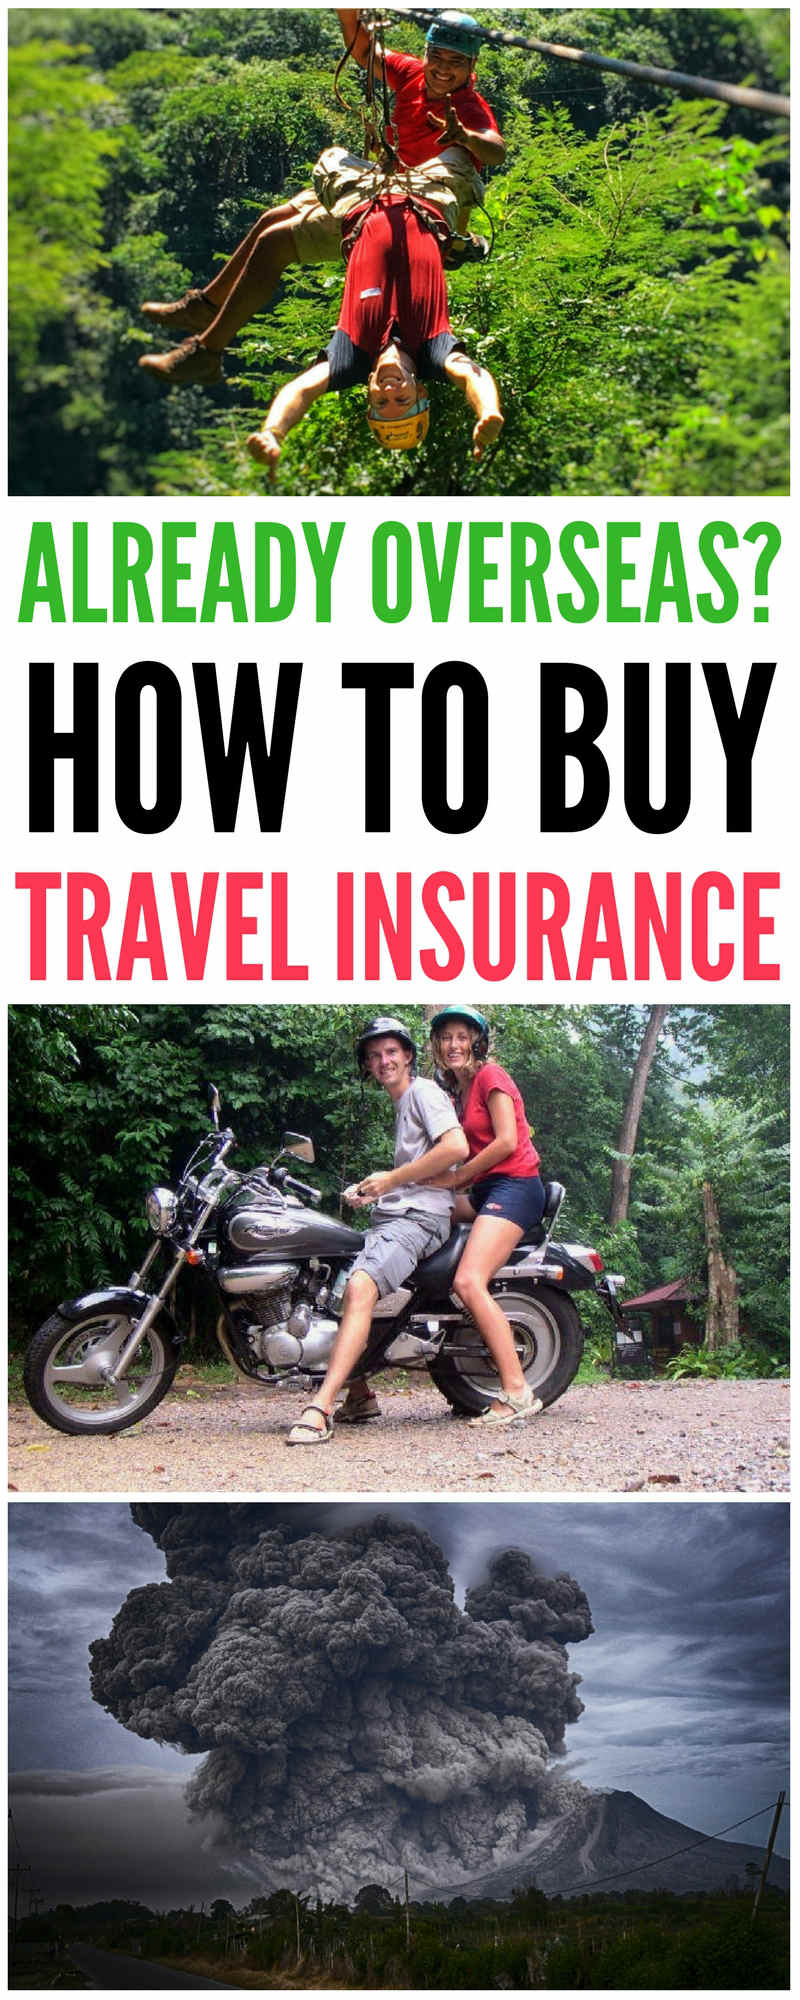 Can you buy travel insurance if already overseas? Yes, you can, and we tell you how and our favorite travel insurance company. travel insurance tips | travel insurance reviews|